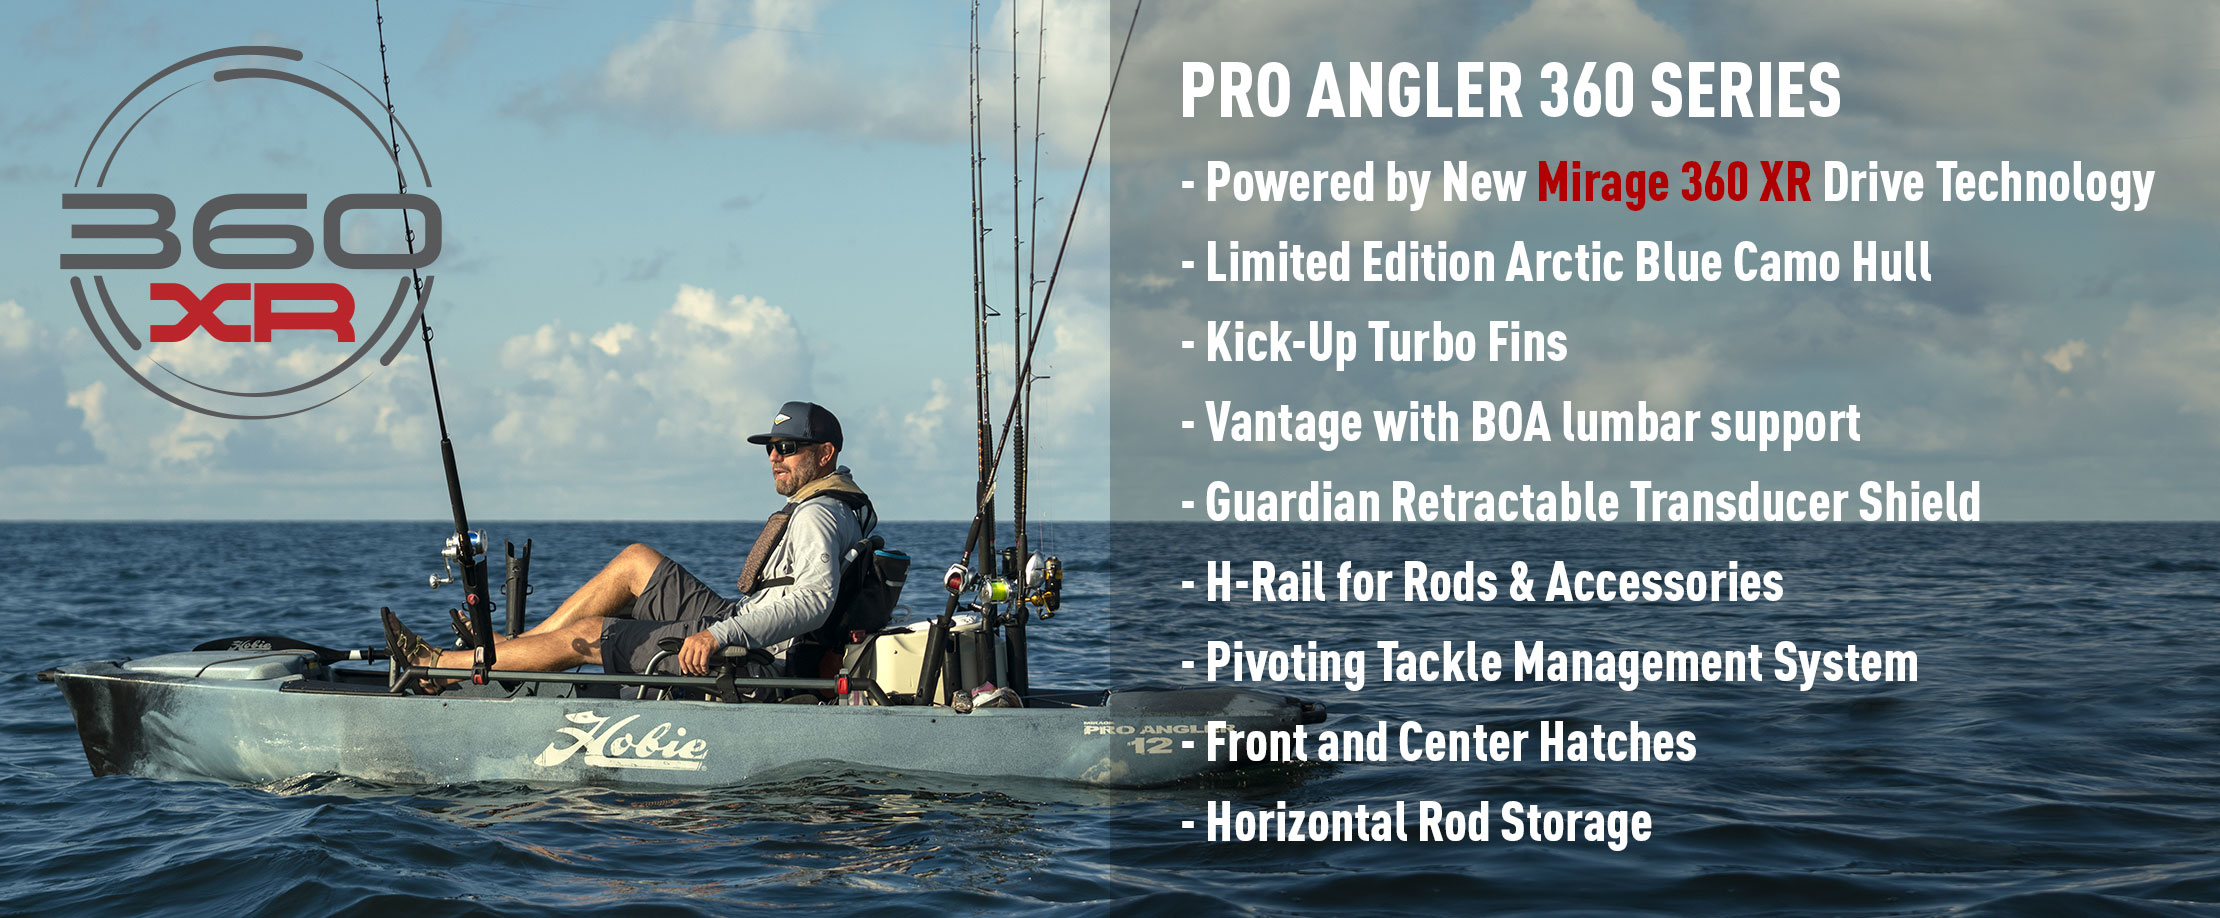 Mirage Pro Angler 12 with 360XR Drive Technology